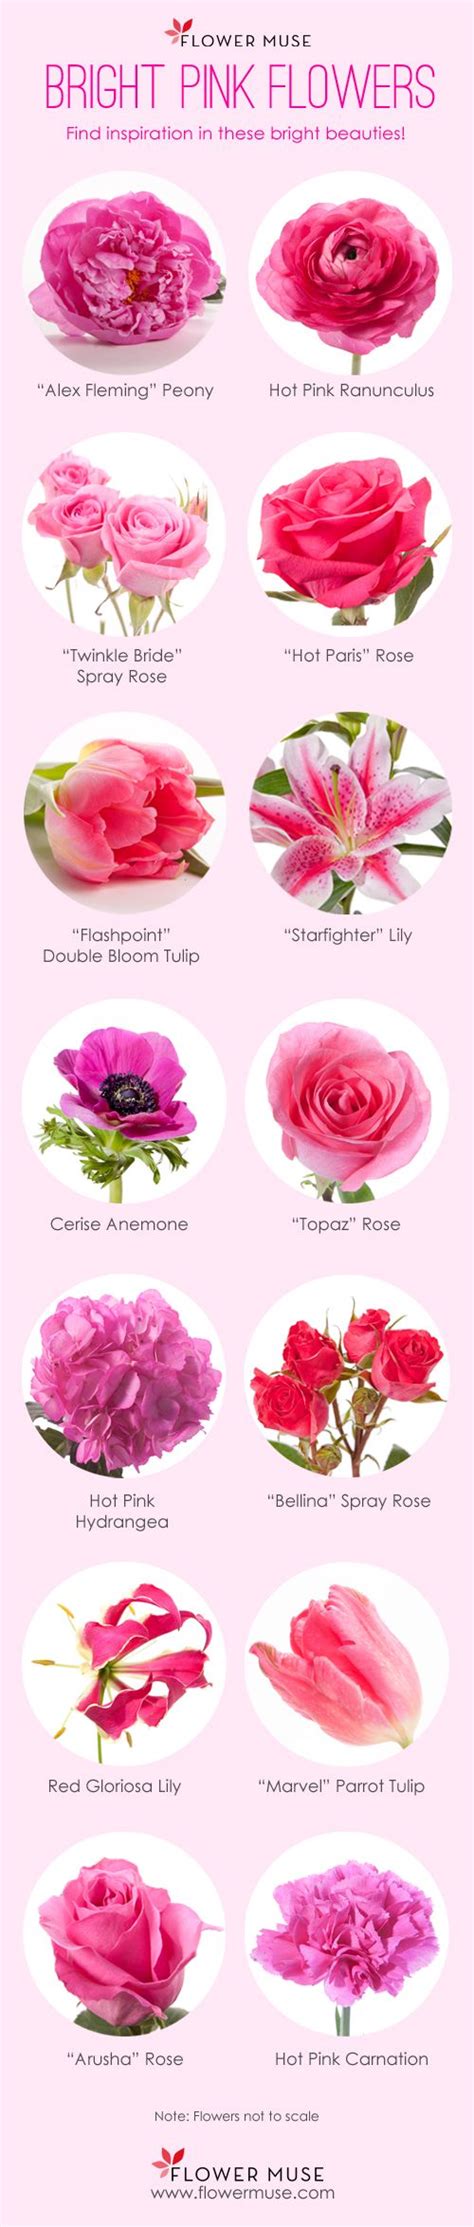 Our Favorite Bright Pink Flowers Flower Muse Blog Wedding Flowers